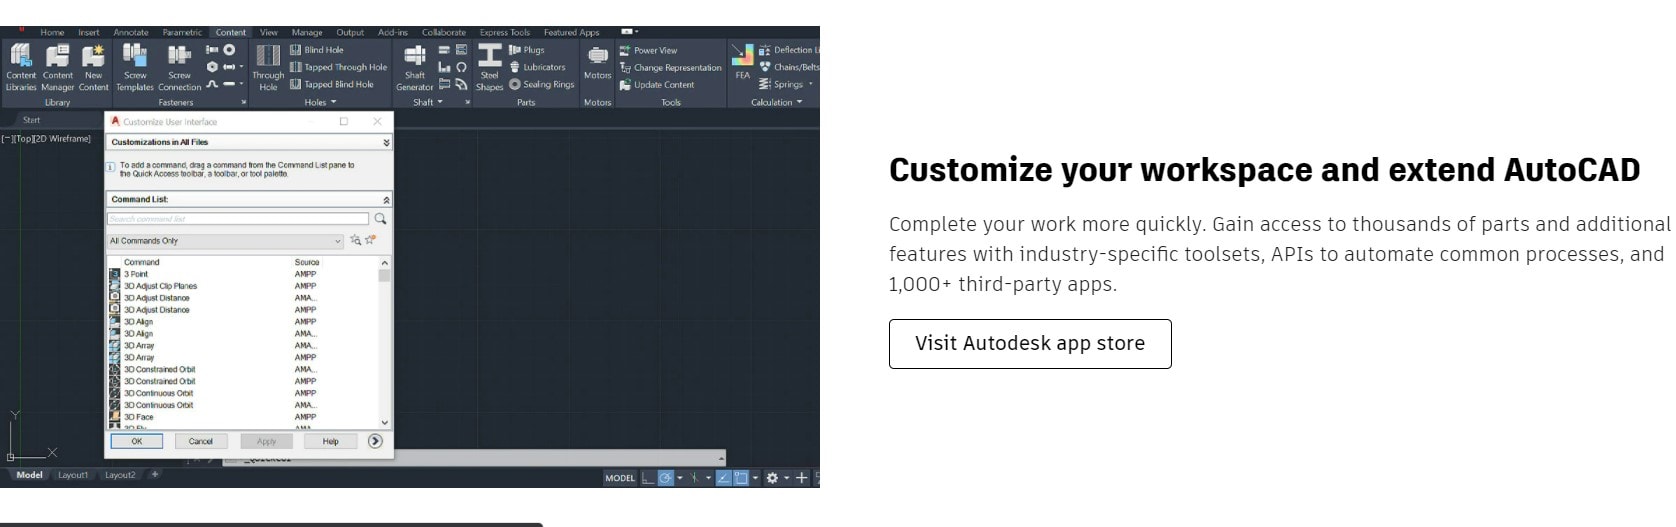 Autodesk AutoCAD Review Cleanup That Is More Intuitive